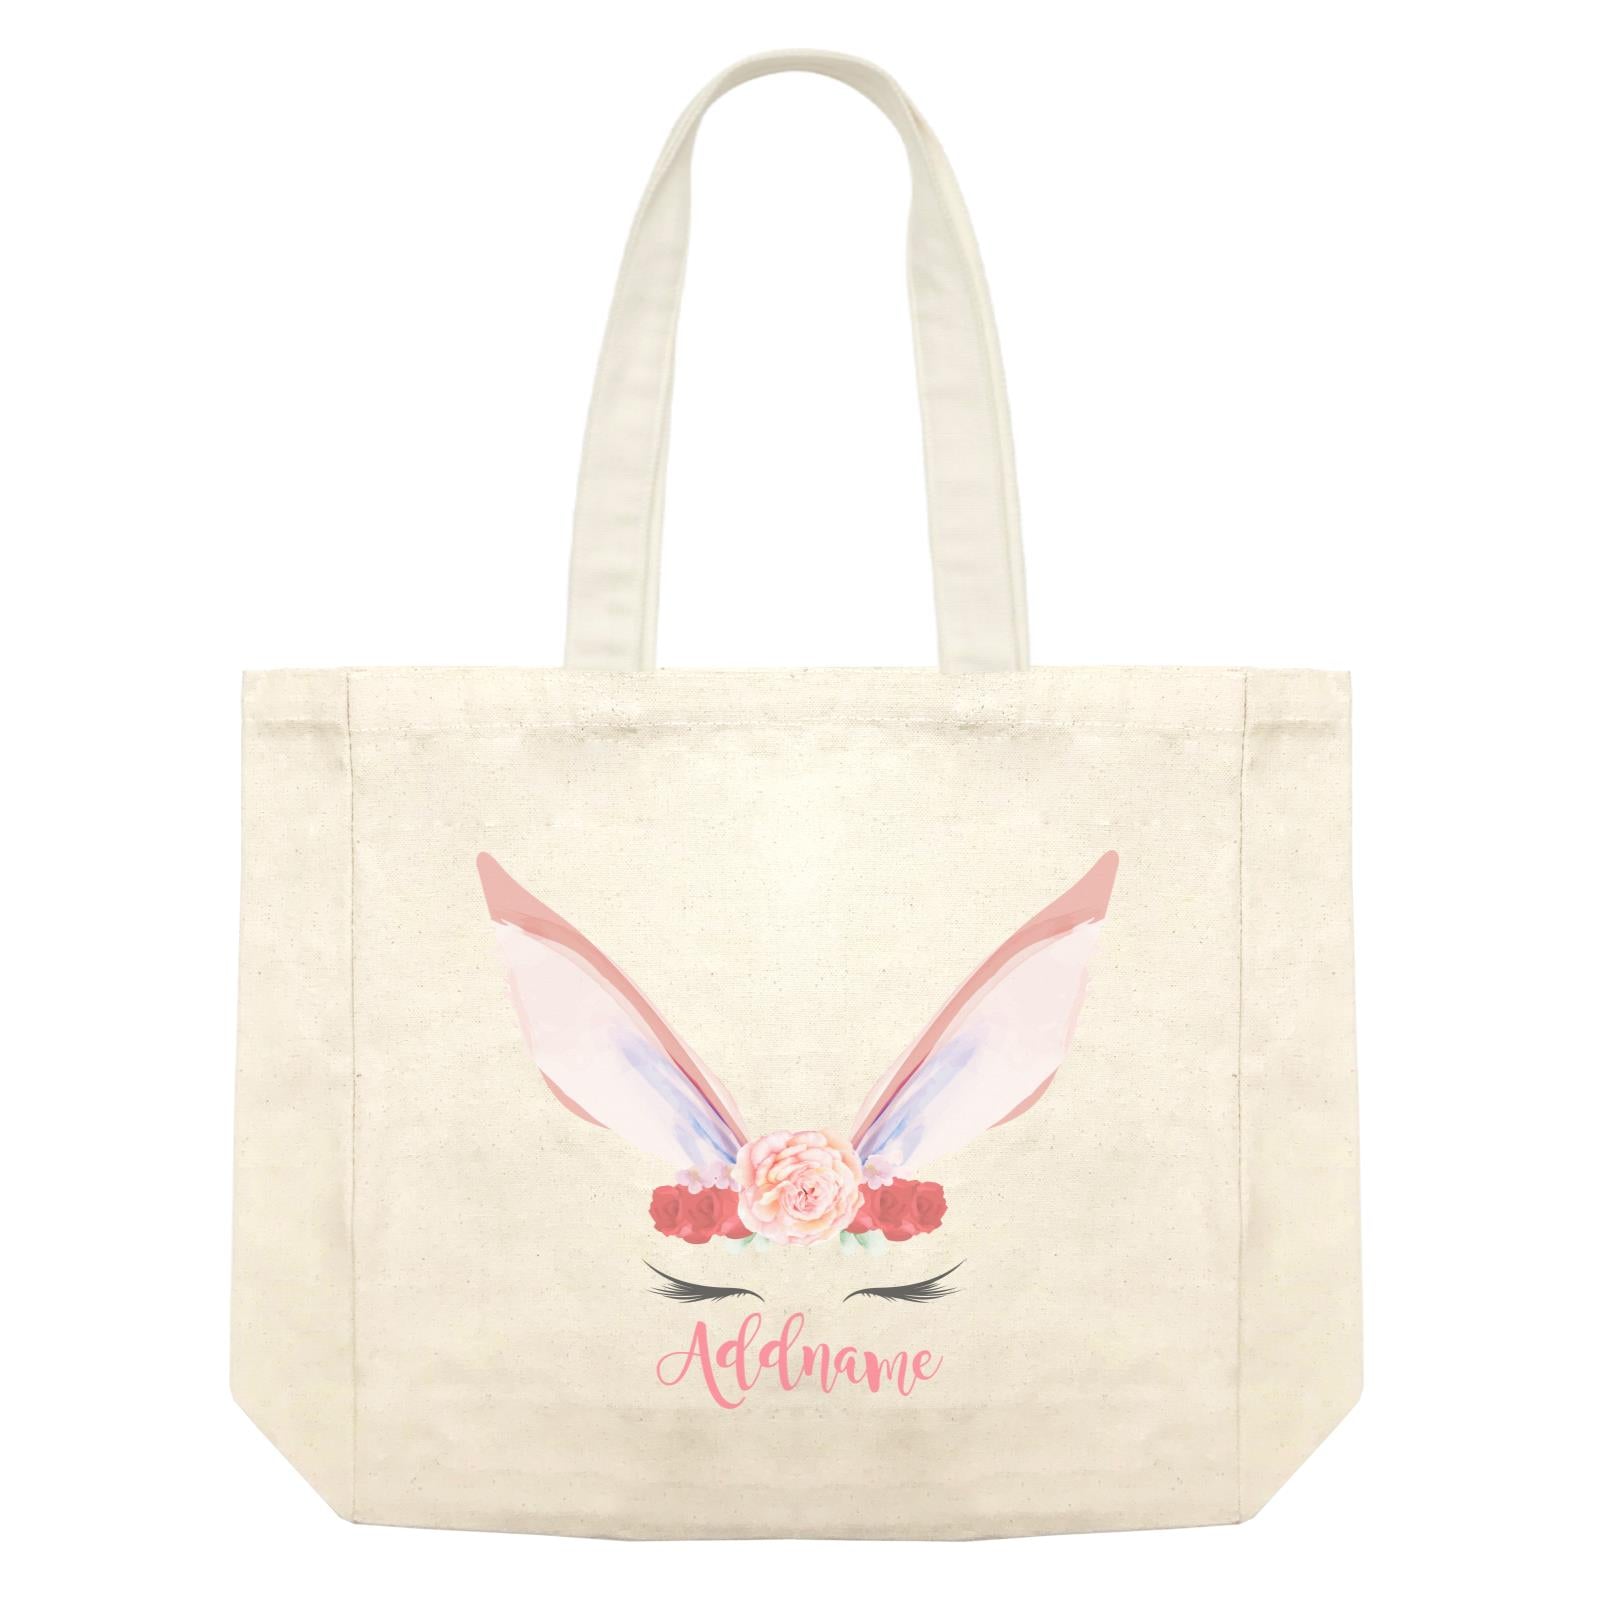 Pink and Red Roses Garland Bunny Face Addname Shopping Bag